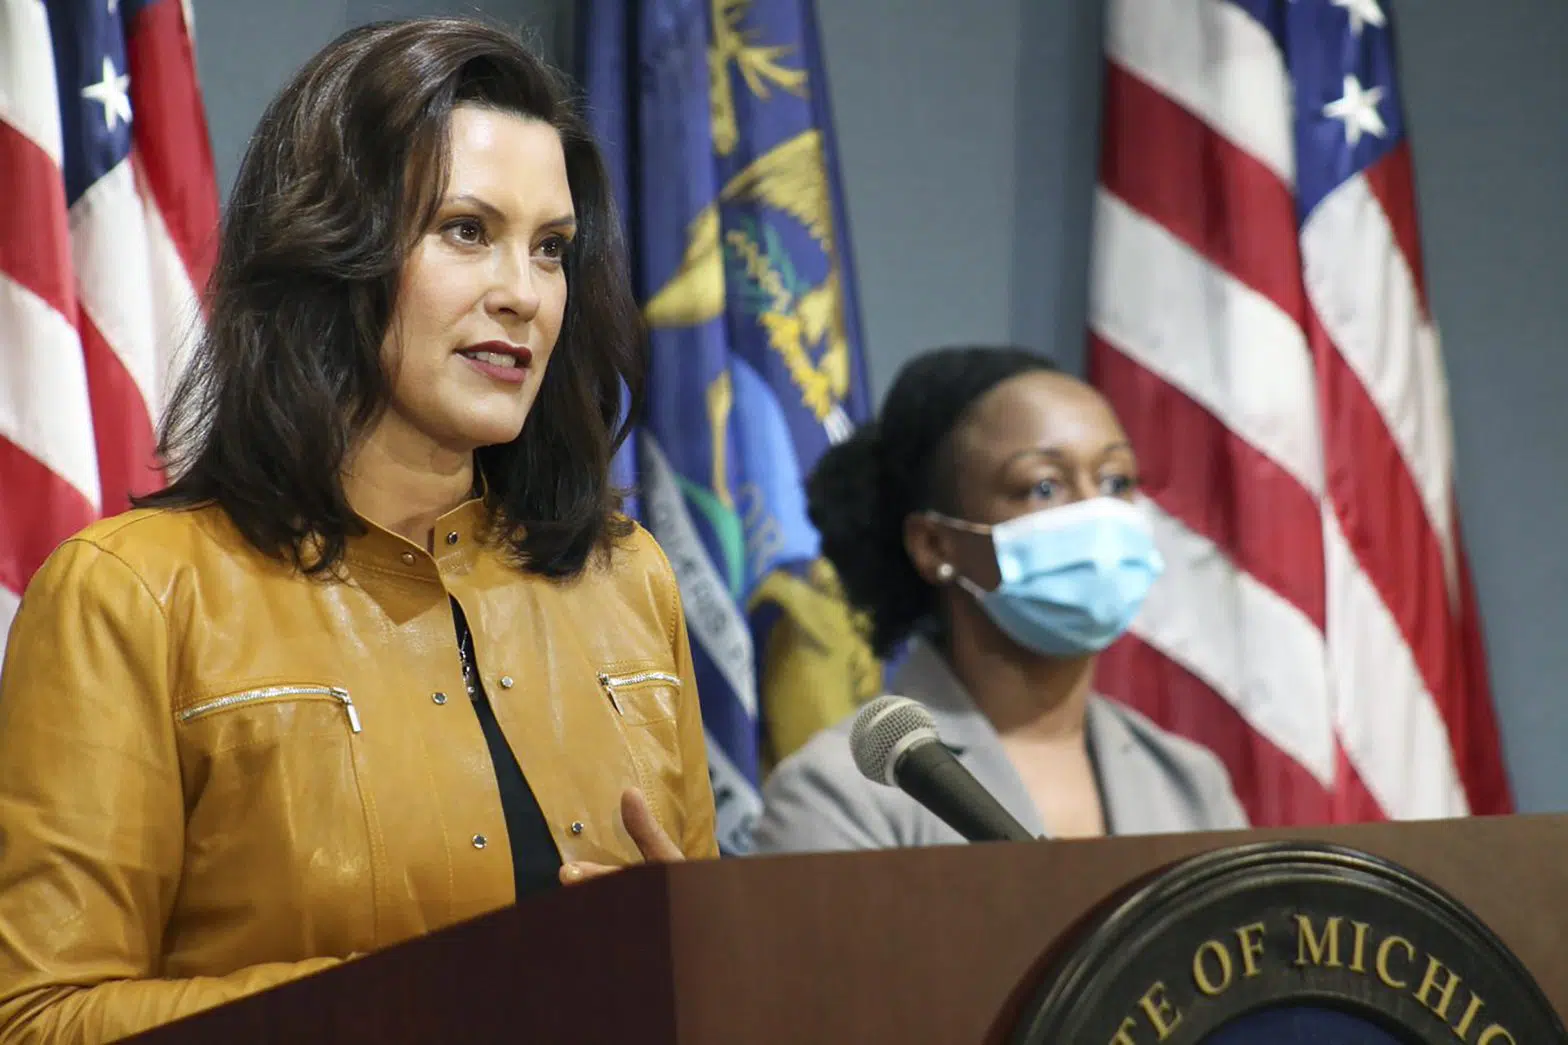 Whitmer Latest to Join Governors Coalition on Election Security